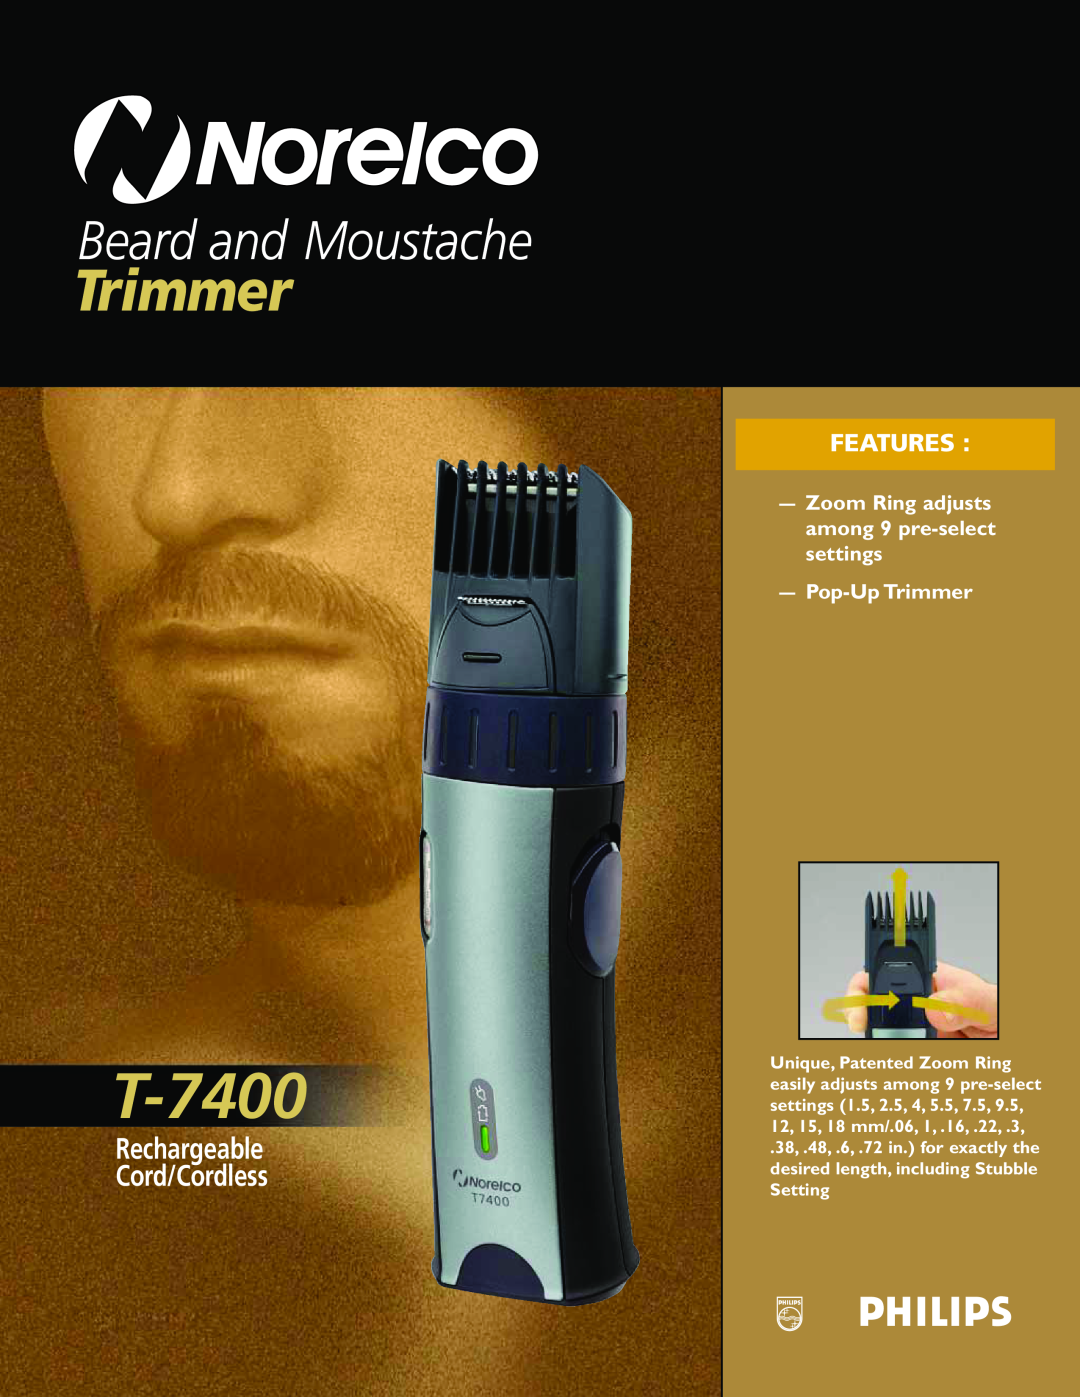 Philips T-7400 manual Features, Rechargeable Cord/Cordless, Zoom Ring adjusts among 9 pre-select settings Pop-Up Trimmer 